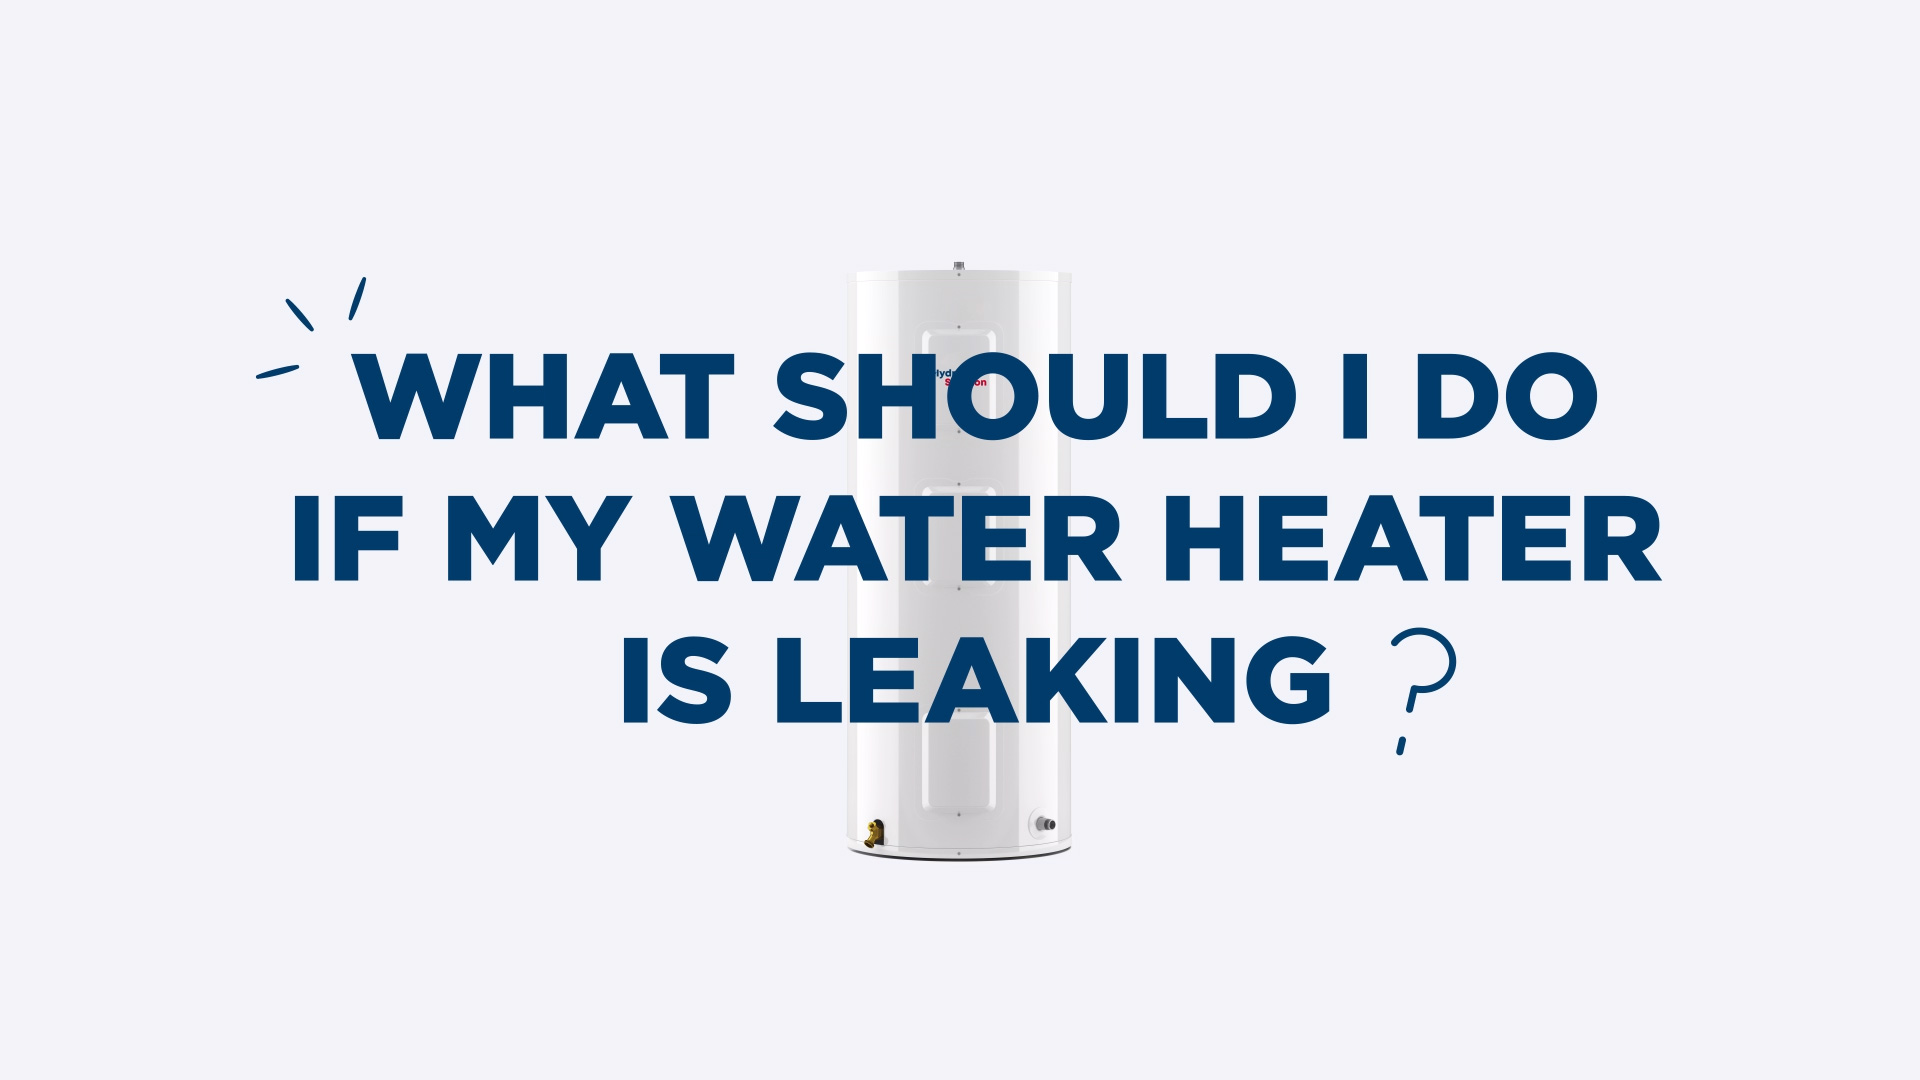 What do I do if my water heater leaks?